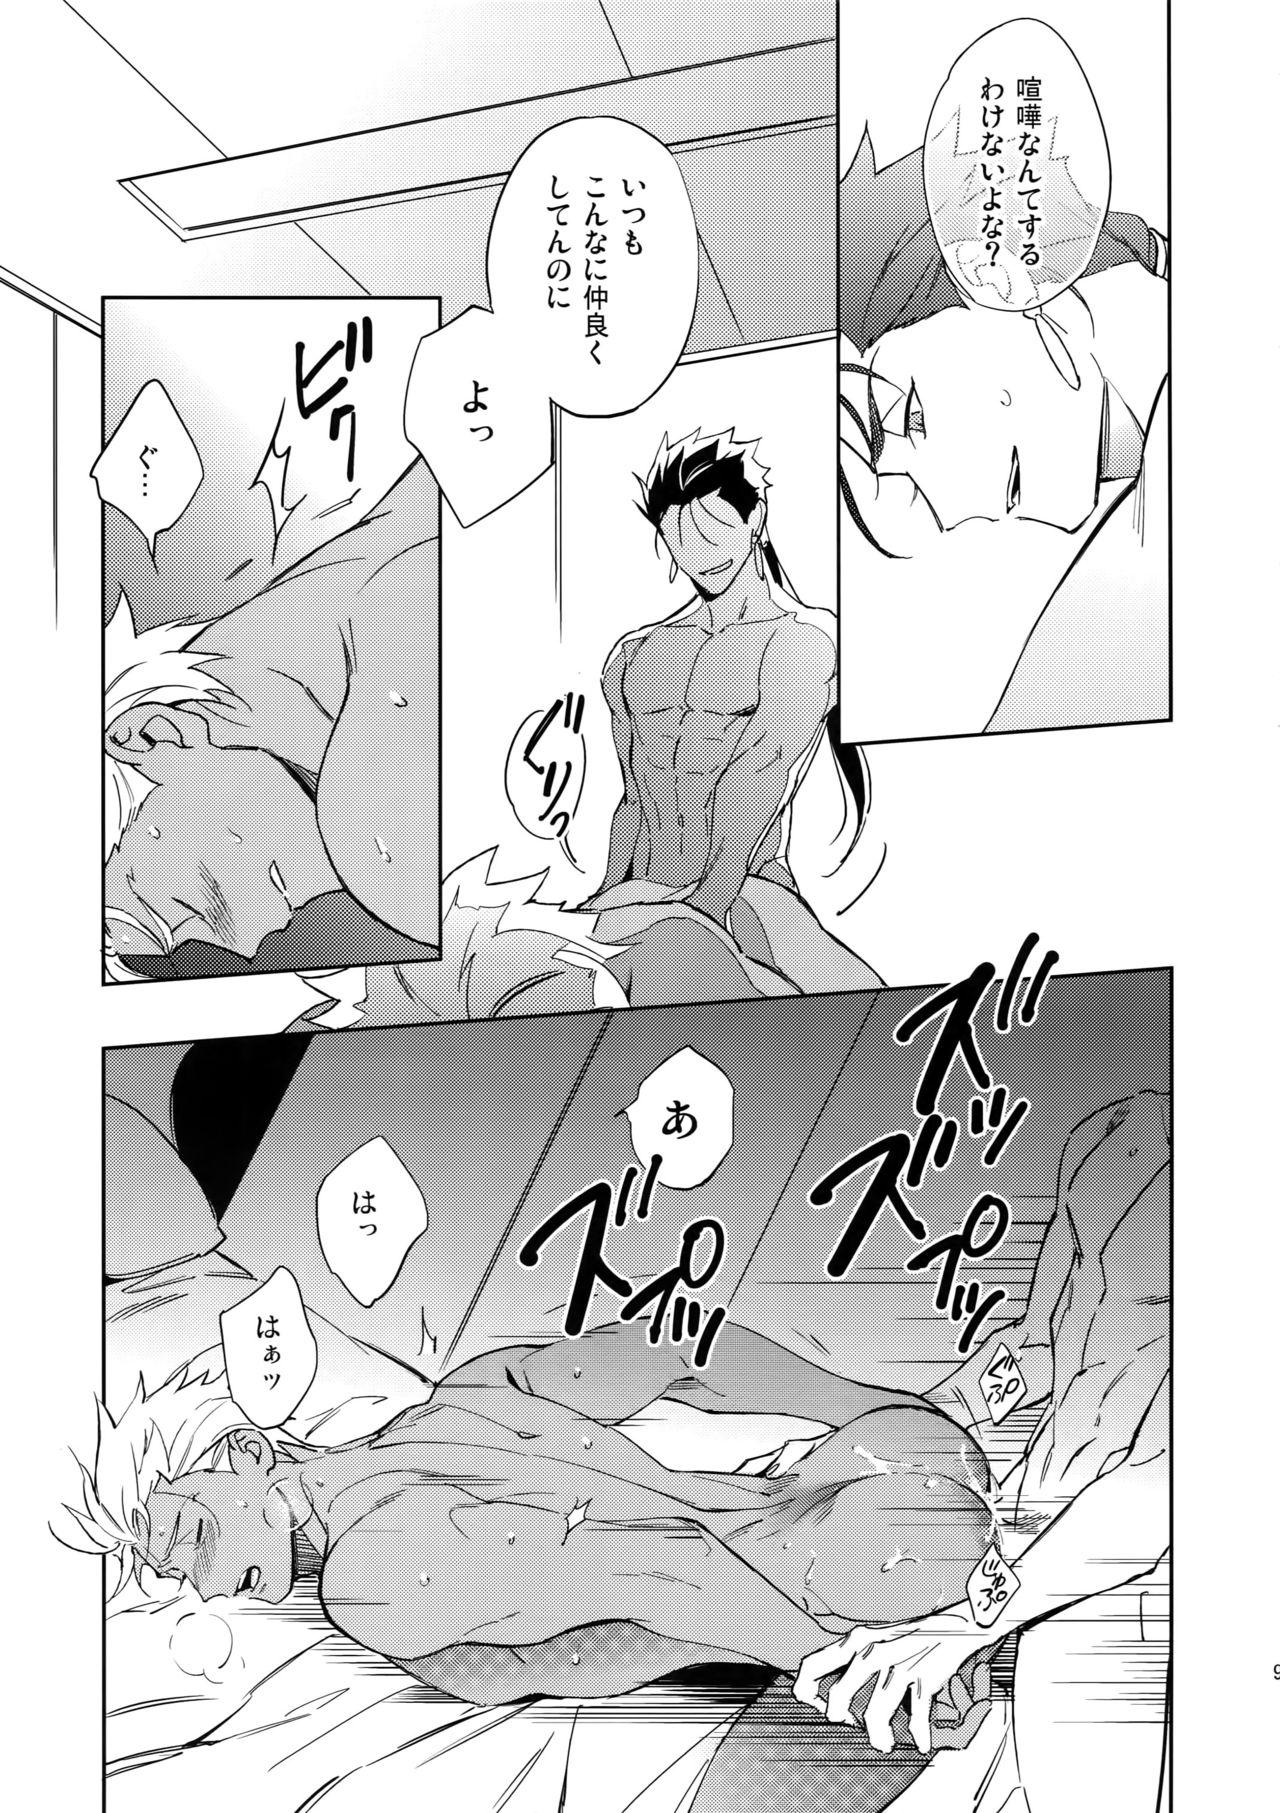 Slapping Mugen Houyou - Fate grand order Bwc - Page 8